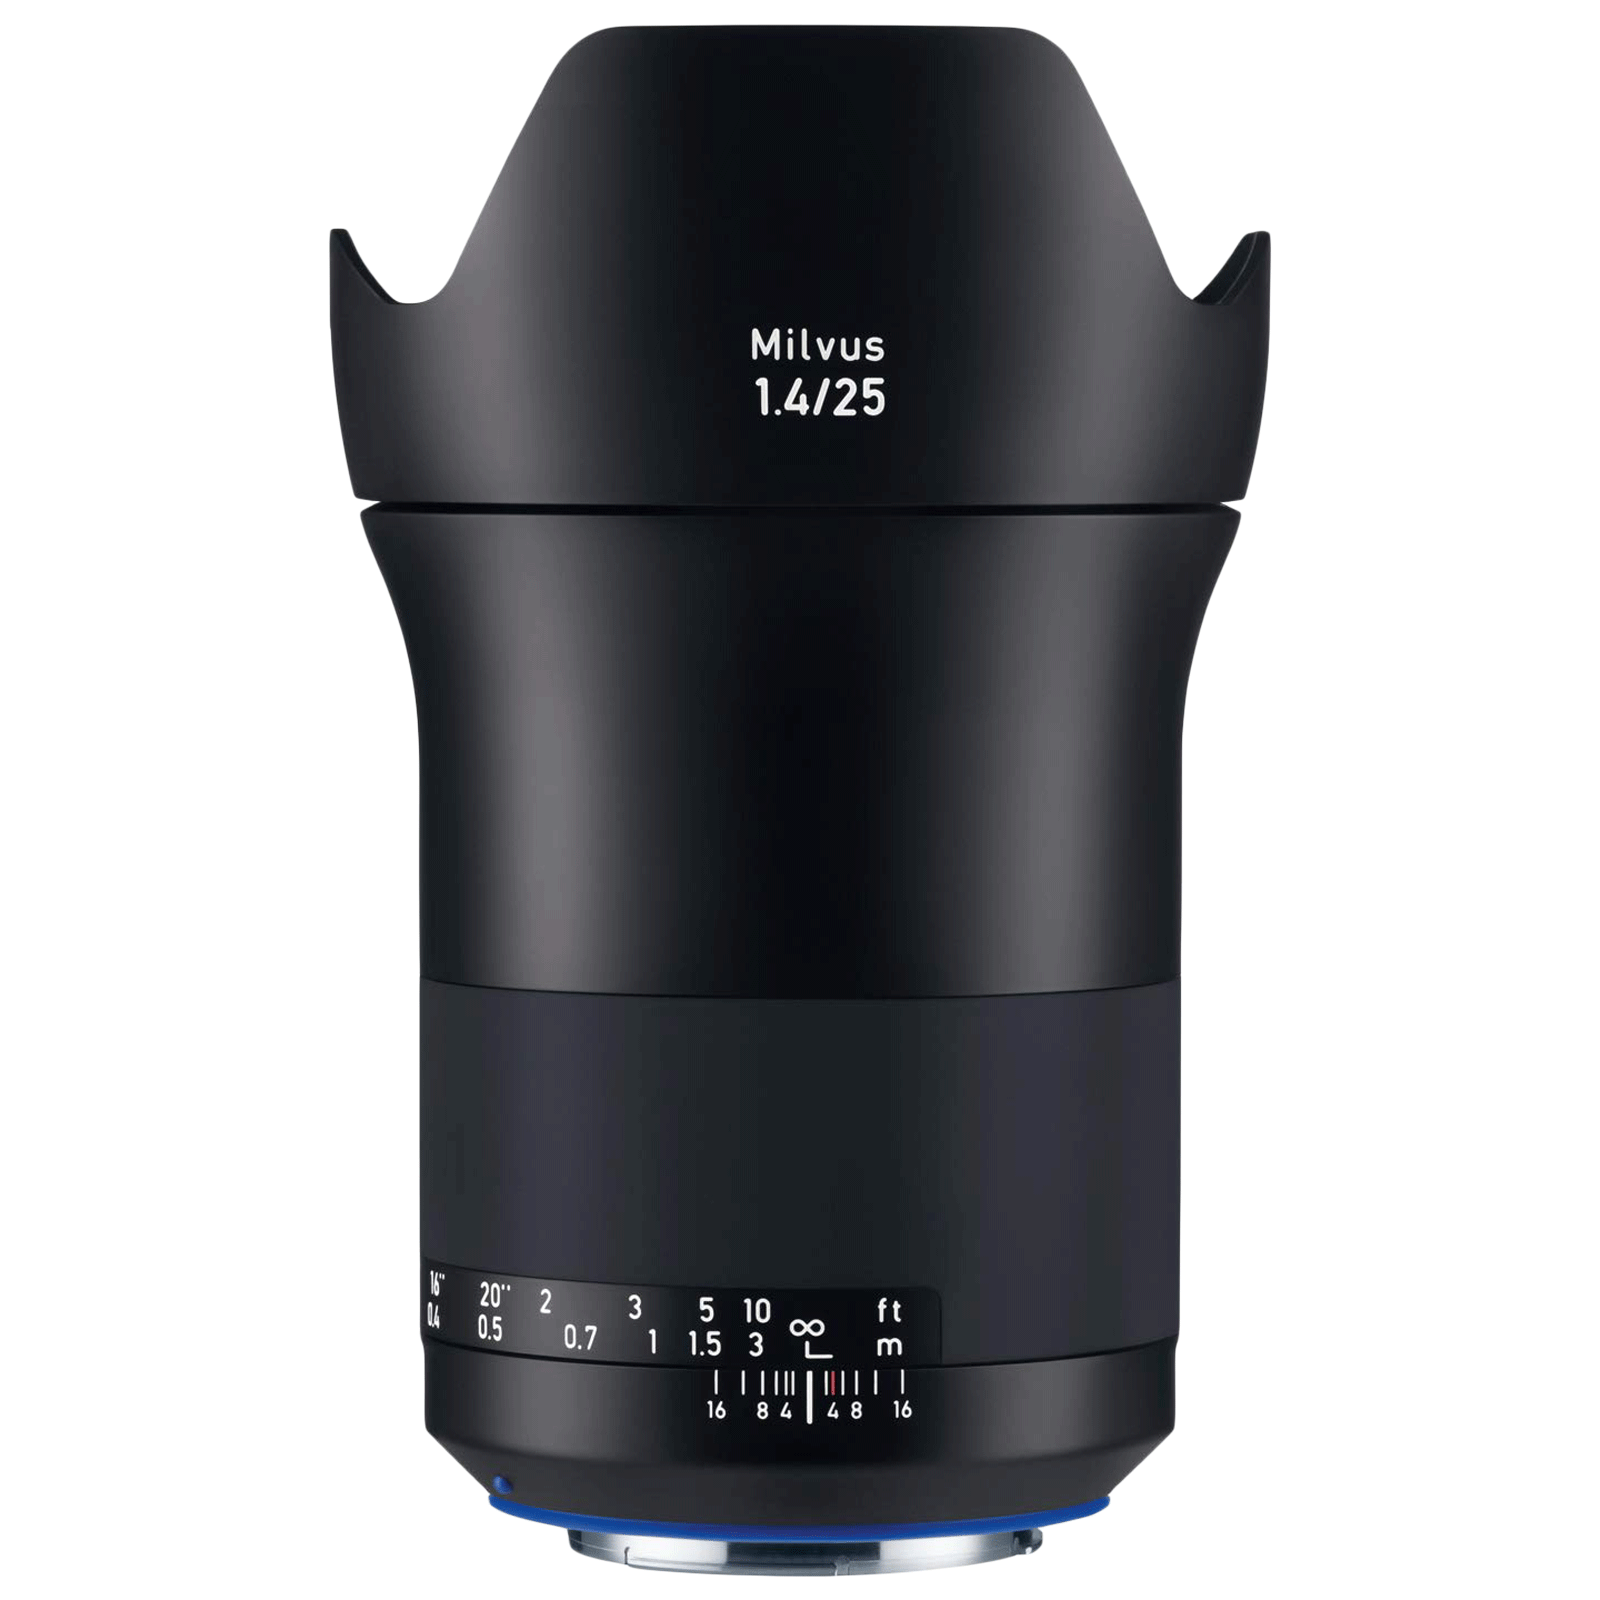 Carl Zeiss Milvus 25mm f/1.4 - f/16 Wide Angle Lens (71 Degree Real Angle View, 000000-2096-551, Mount Black)_1